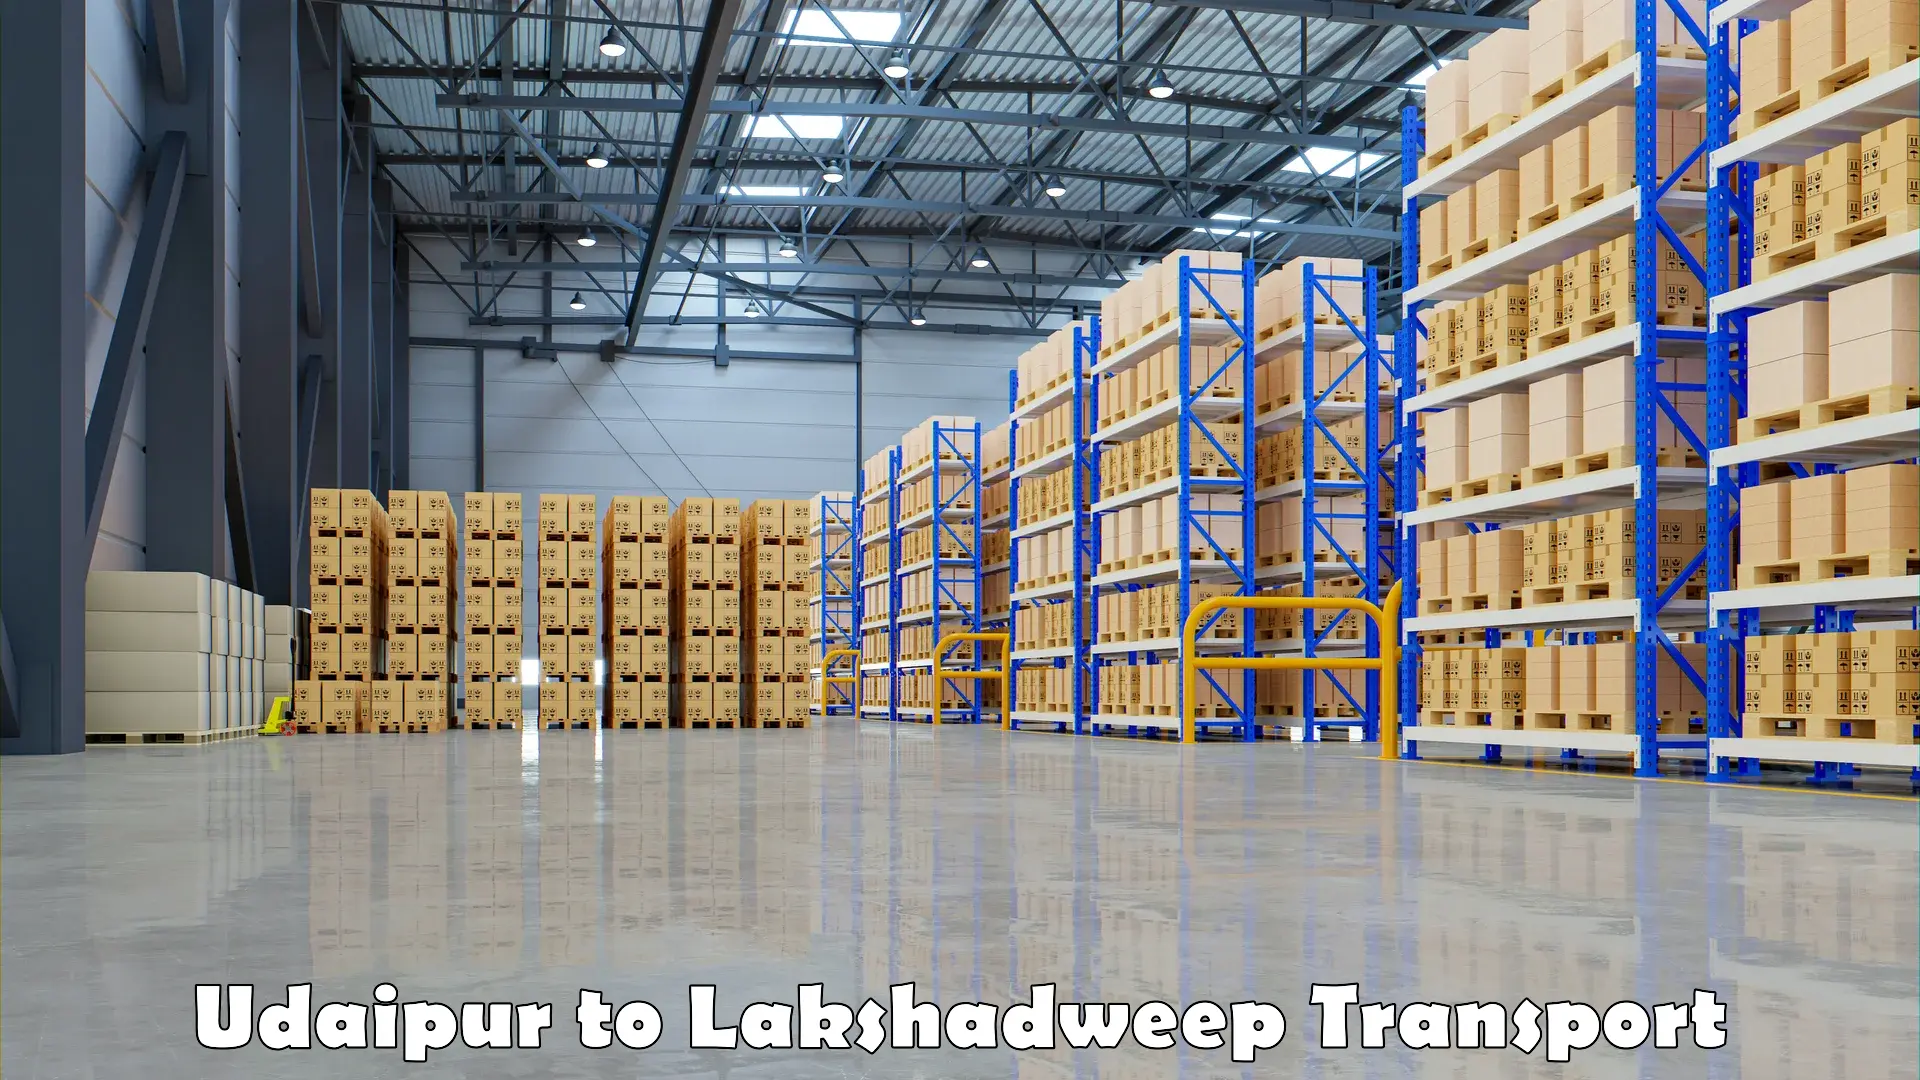 Cargo train transport services Udaipur to Lakshadweep